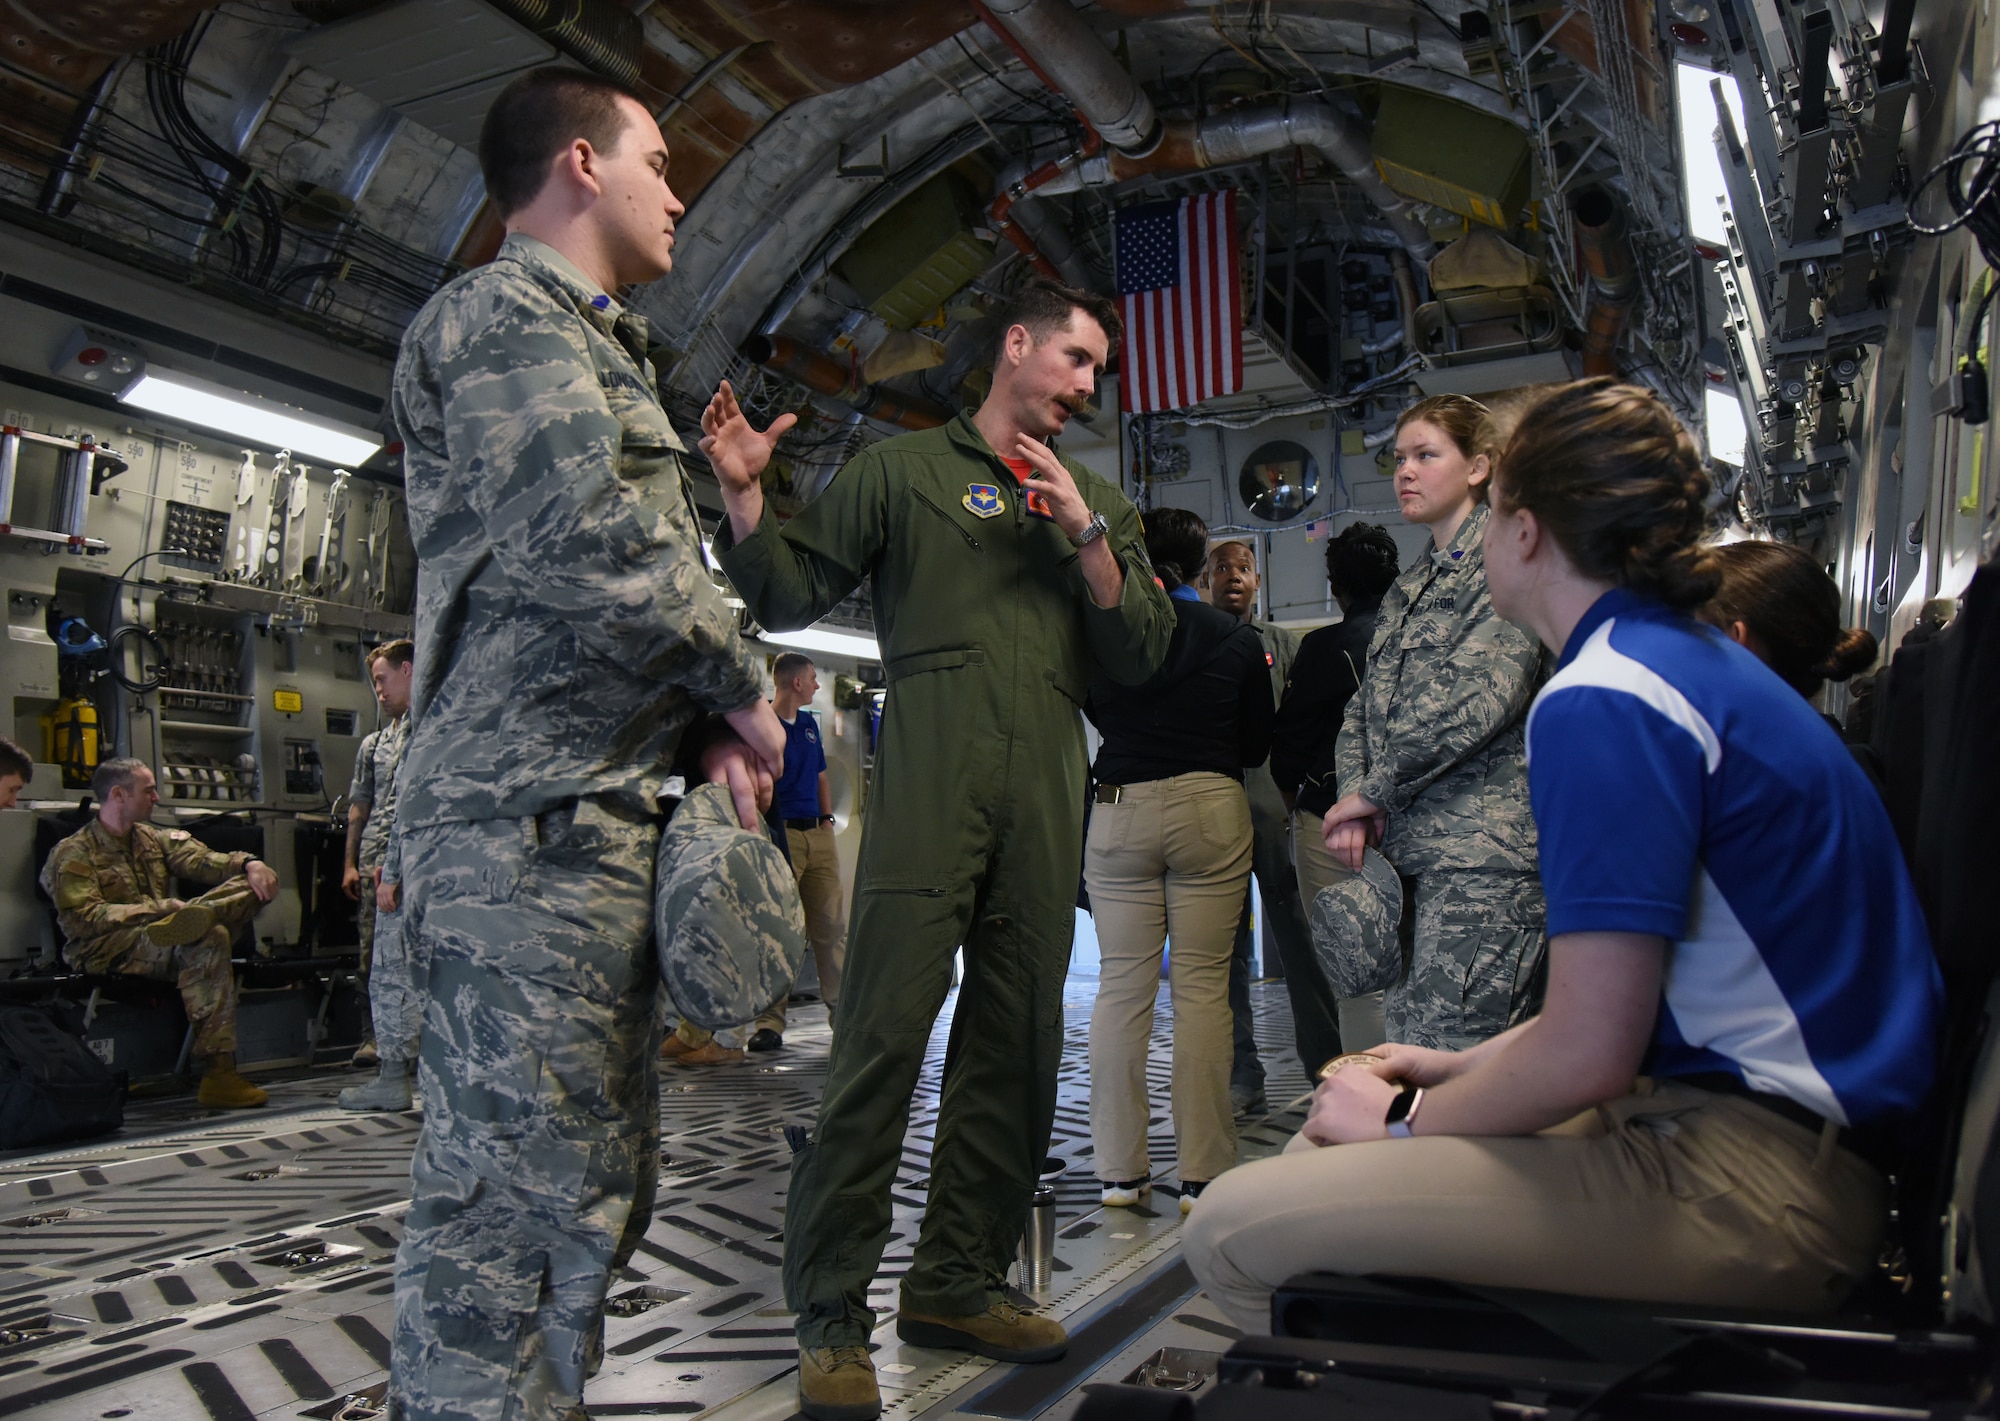 U.S. Air Force Capt. Andrew Mazzarelli, 58th Airlift Squadron tactics flight commander, Altus Air Force Base, Oklahoma, briefs on the capabilities of a C-17 Globemaster III to Air Force ROTC cadets during the fifth annual Pathways to Blue on Keesler Air Force Base, Mississippi, April 5, 2019. Pathways to Blue is a diversity outreach event hosted by Second Air Force with the support of the 81st Training Wing and the 403rd Wing. More than 250 cadets from 12 different colleges and universities were provided hands-on demonstrations of various career fields. (U.S. Air Force photo by Kemberly Groue)